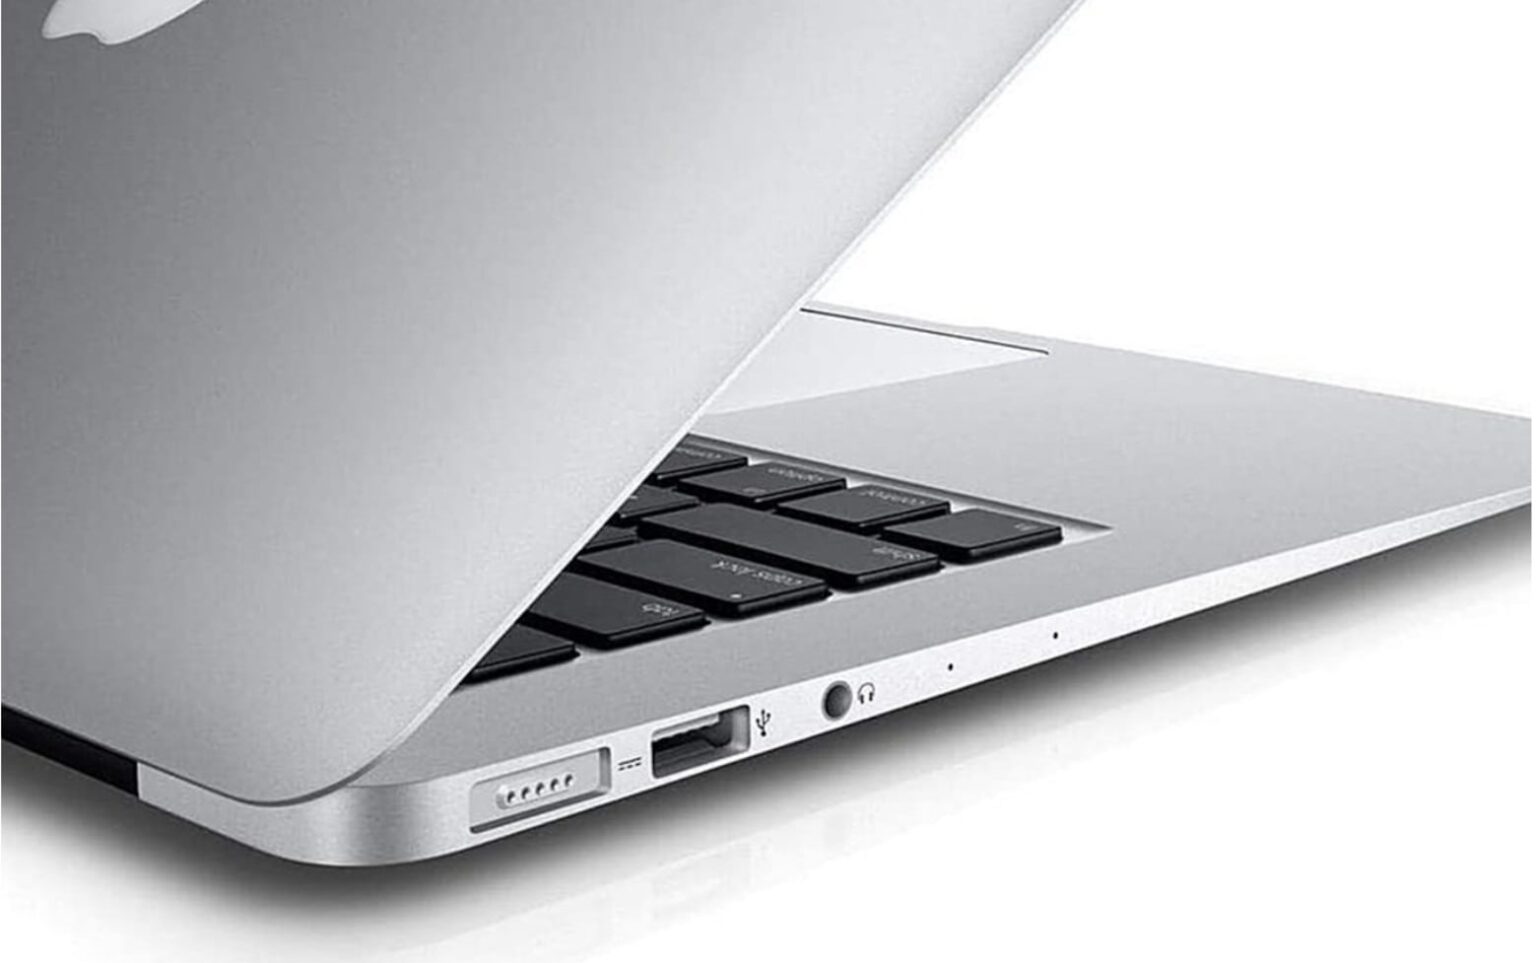 This Intel MacBook Air is only $369.99 for a limited time.